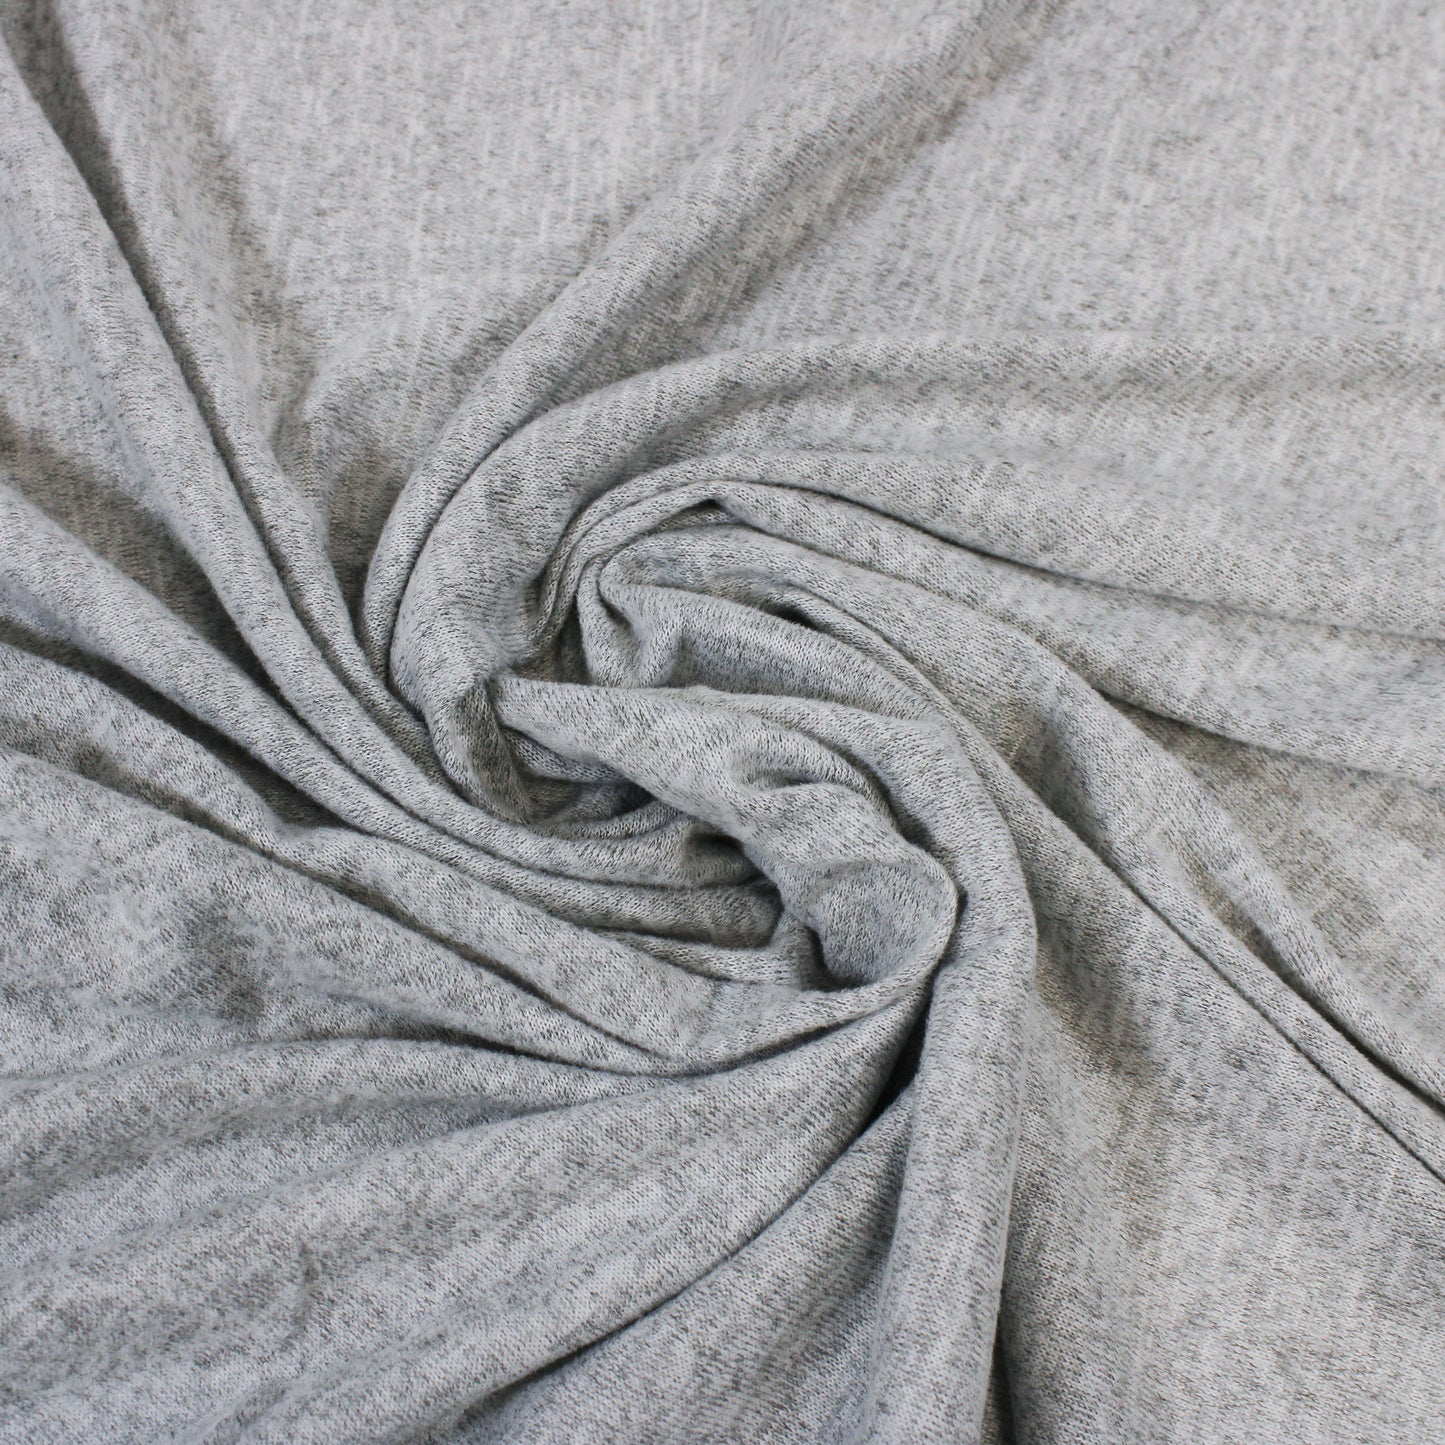 WHOLESALE ROLL - BRUSHED STONE GREY JERSEY